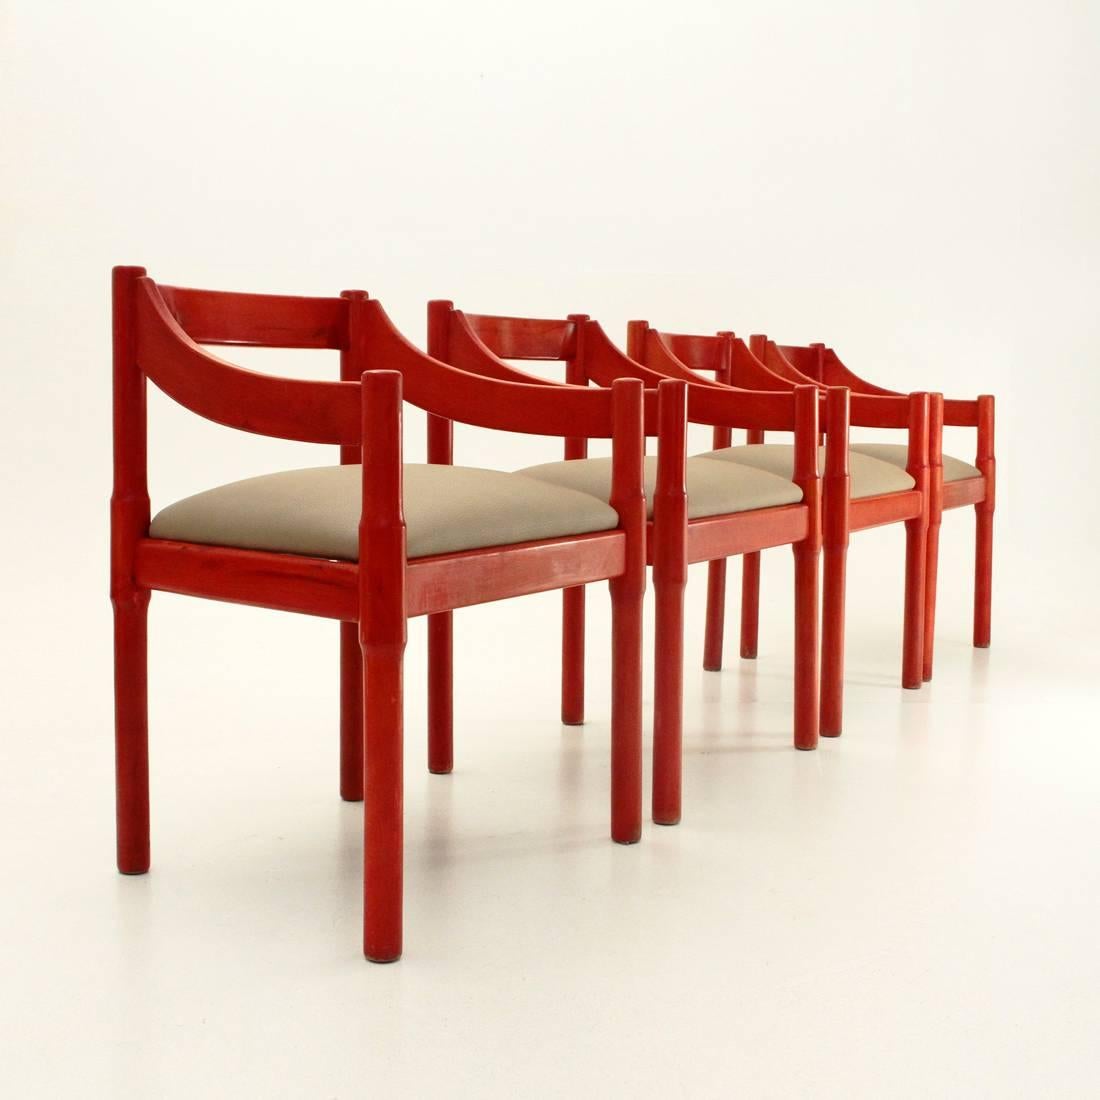 Four 1960s chairs initially designed by Vico Magistretti for the Carimate club near Milan, were then produced for the public by Cassina.
Red aniline dyed beechwood frame.
Seat padded and lined in faux beige leather.
Good general conditions, some